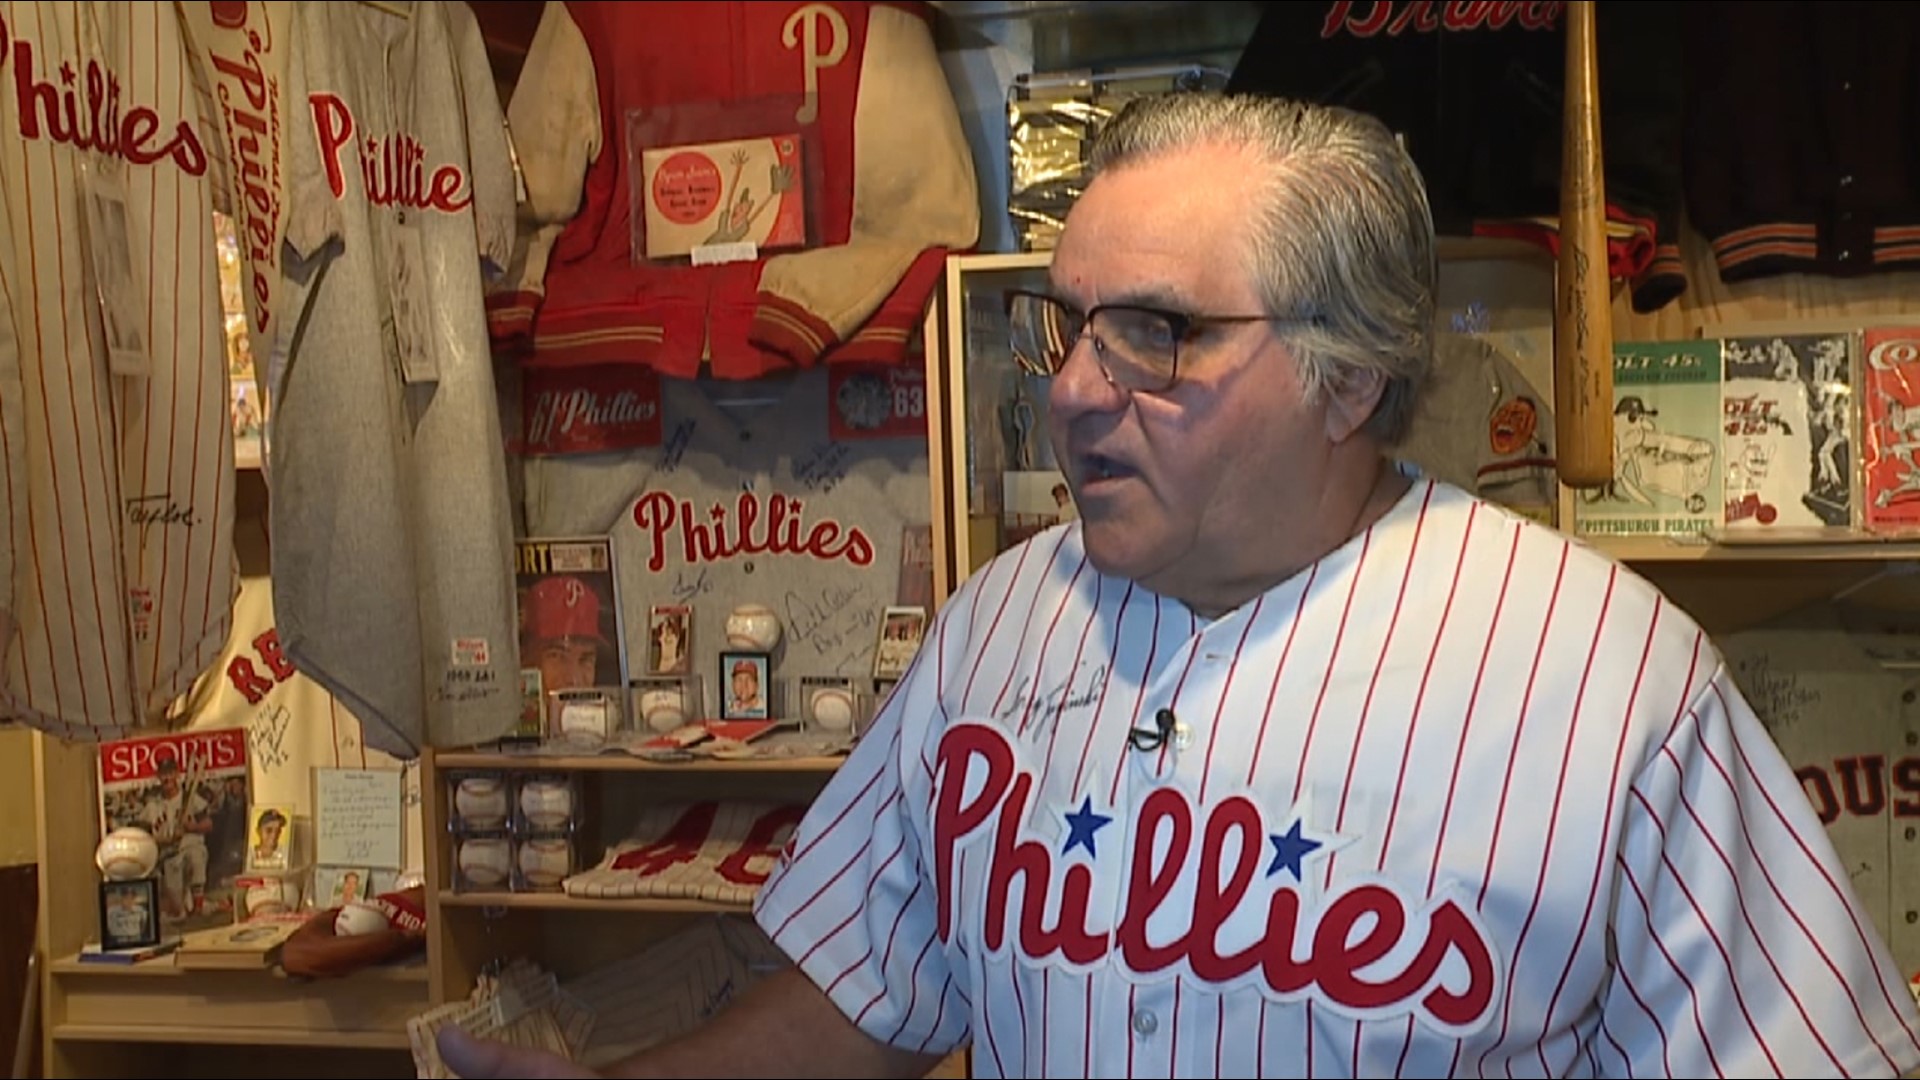 John Gadosh, of Middletown, has a special collection of jerseys that capture some of the best of baseball history.